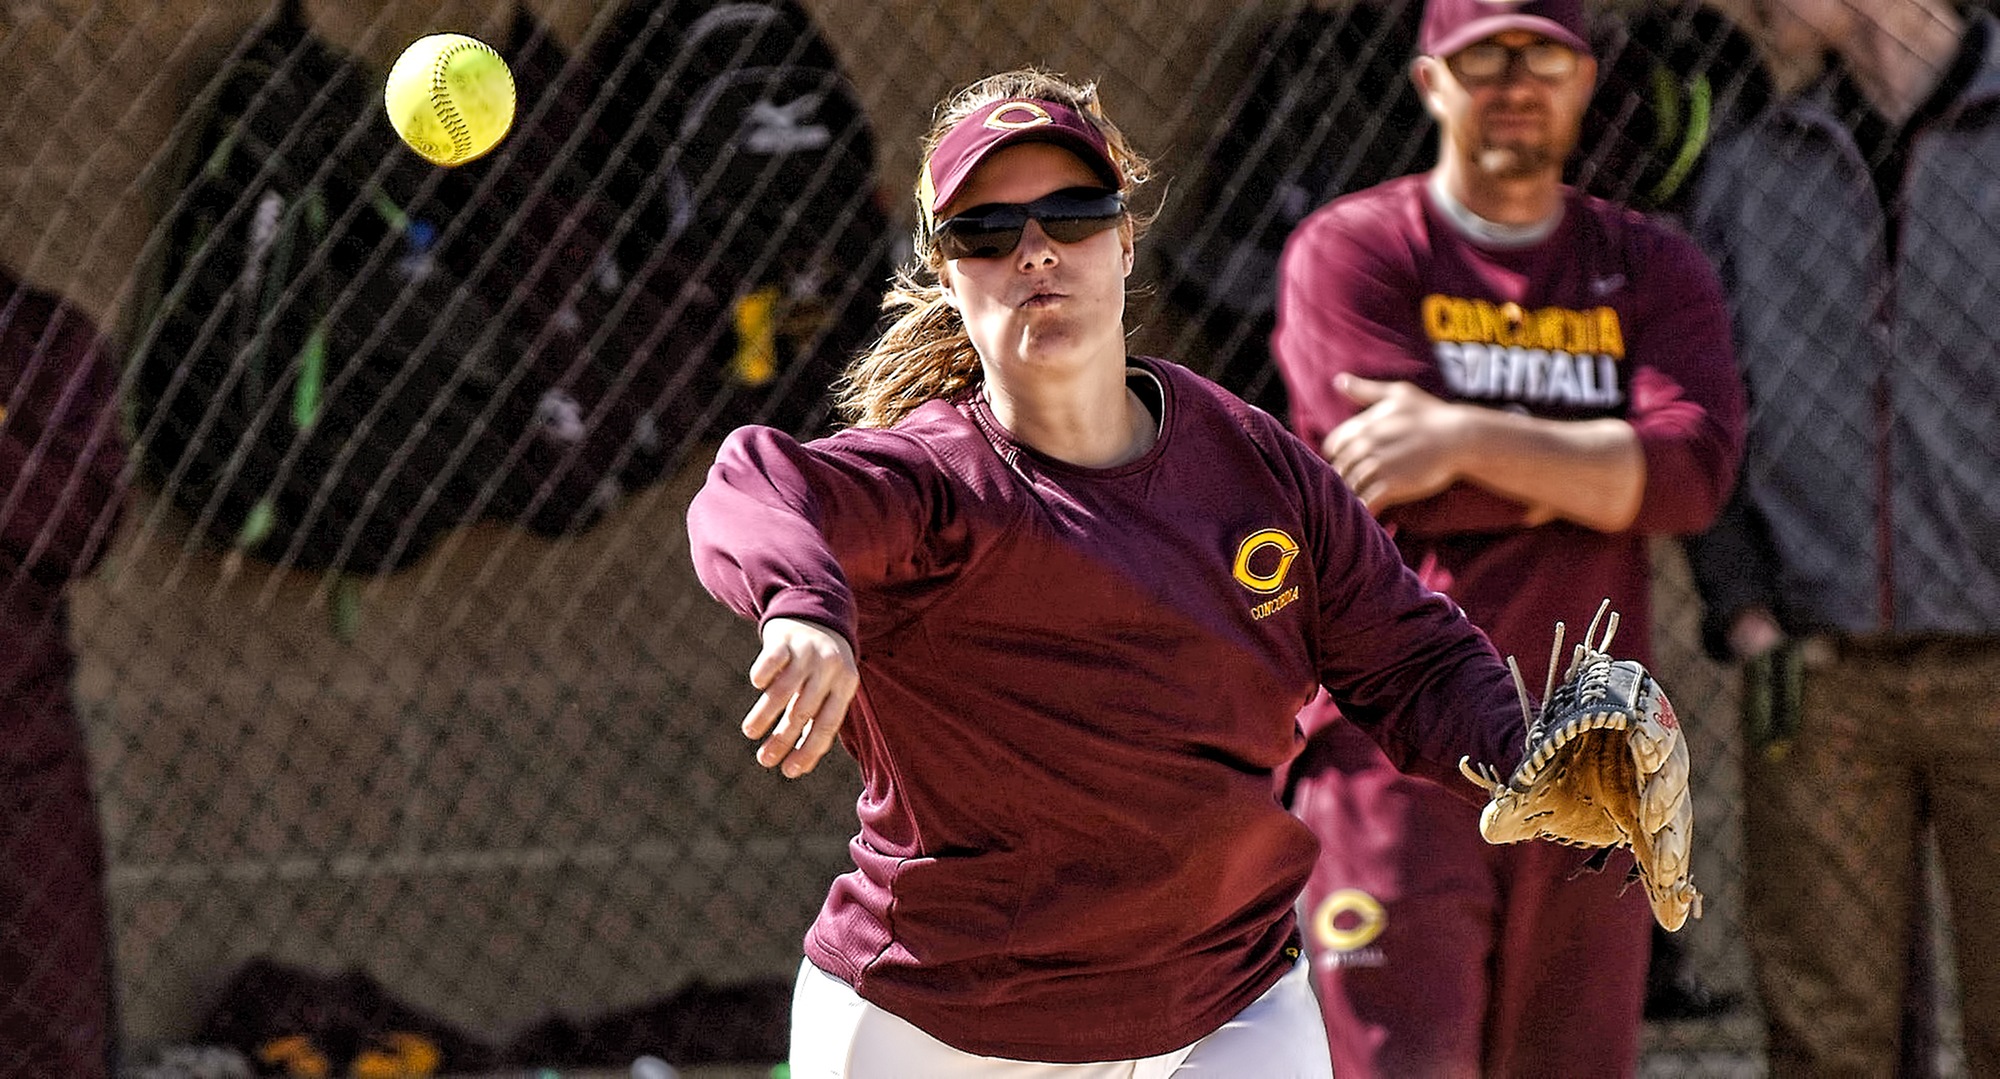 Sophomore Taylor Erholtz went 2-for-3 in each game as the Cobbers split their two games on Day 2 in Florida. She leads the team with a .583 average.